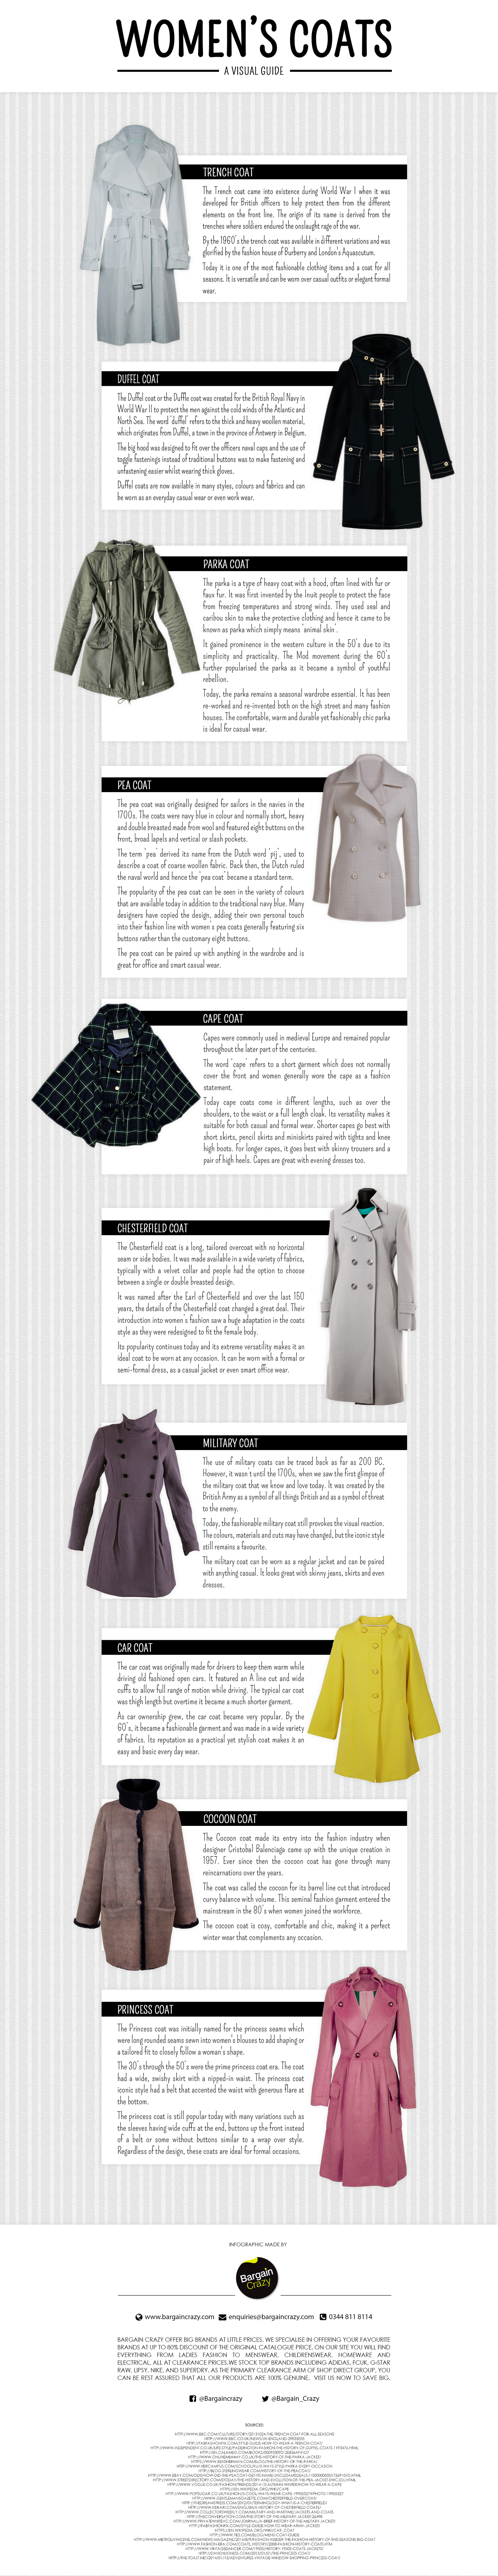 GUIDE COATS & HOW TO USE THEM 